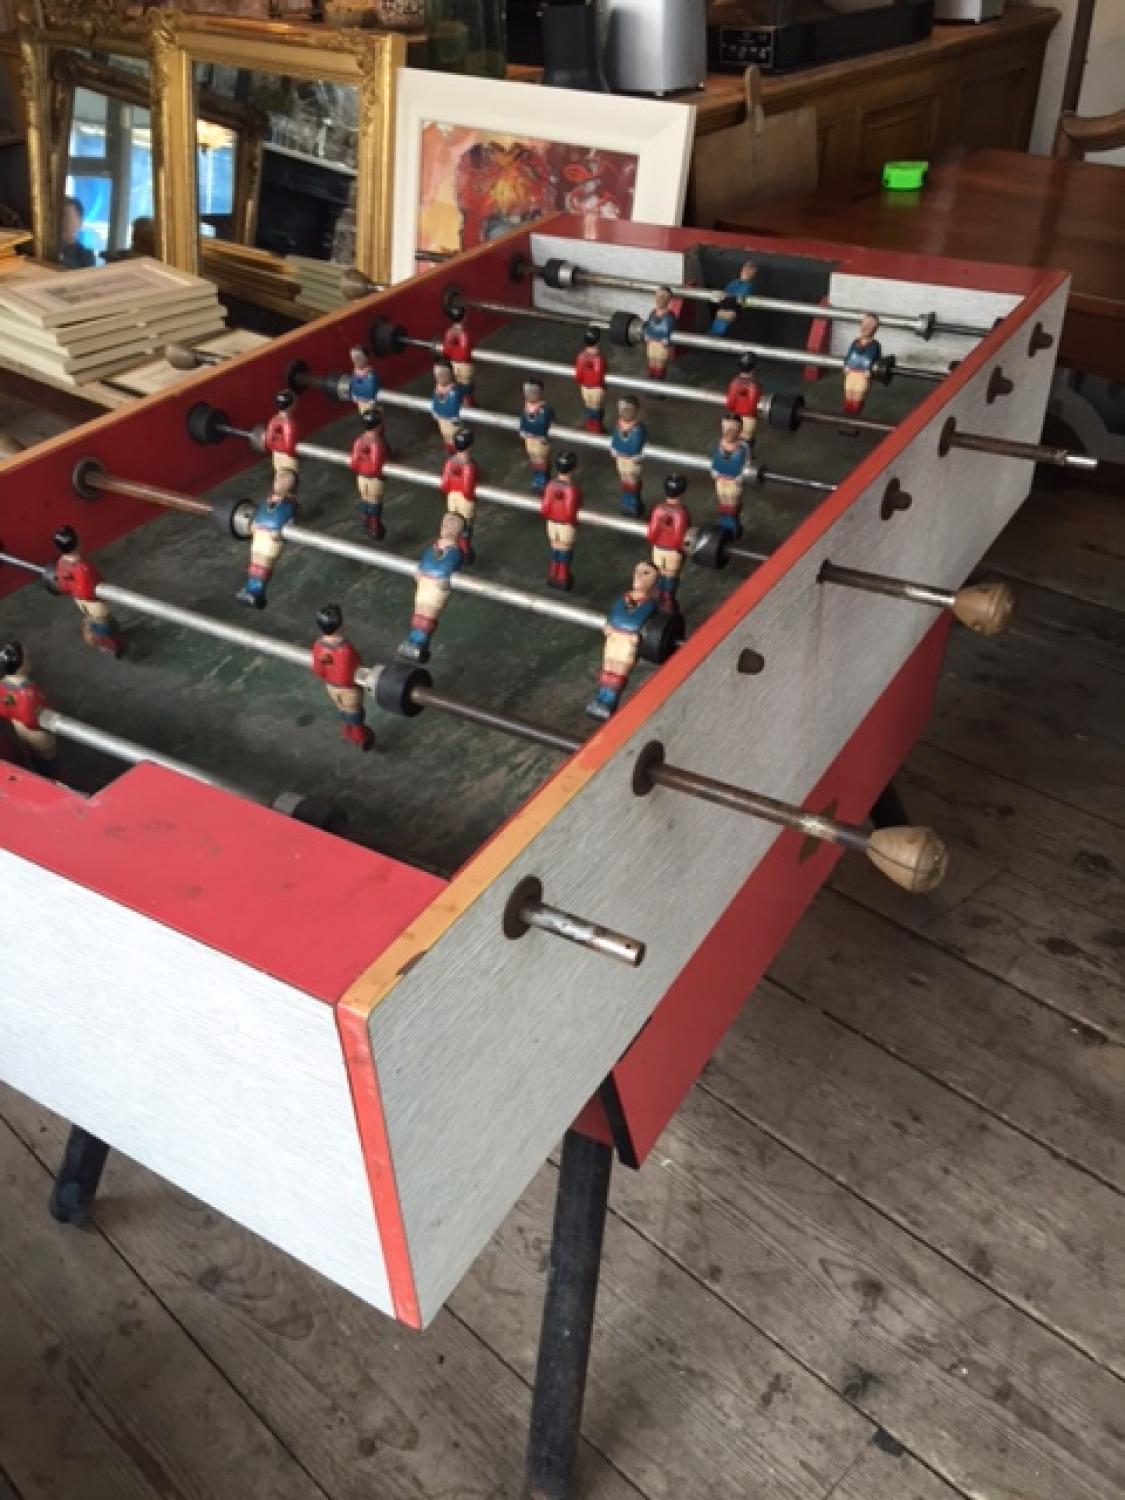 1950's French Foosball Table